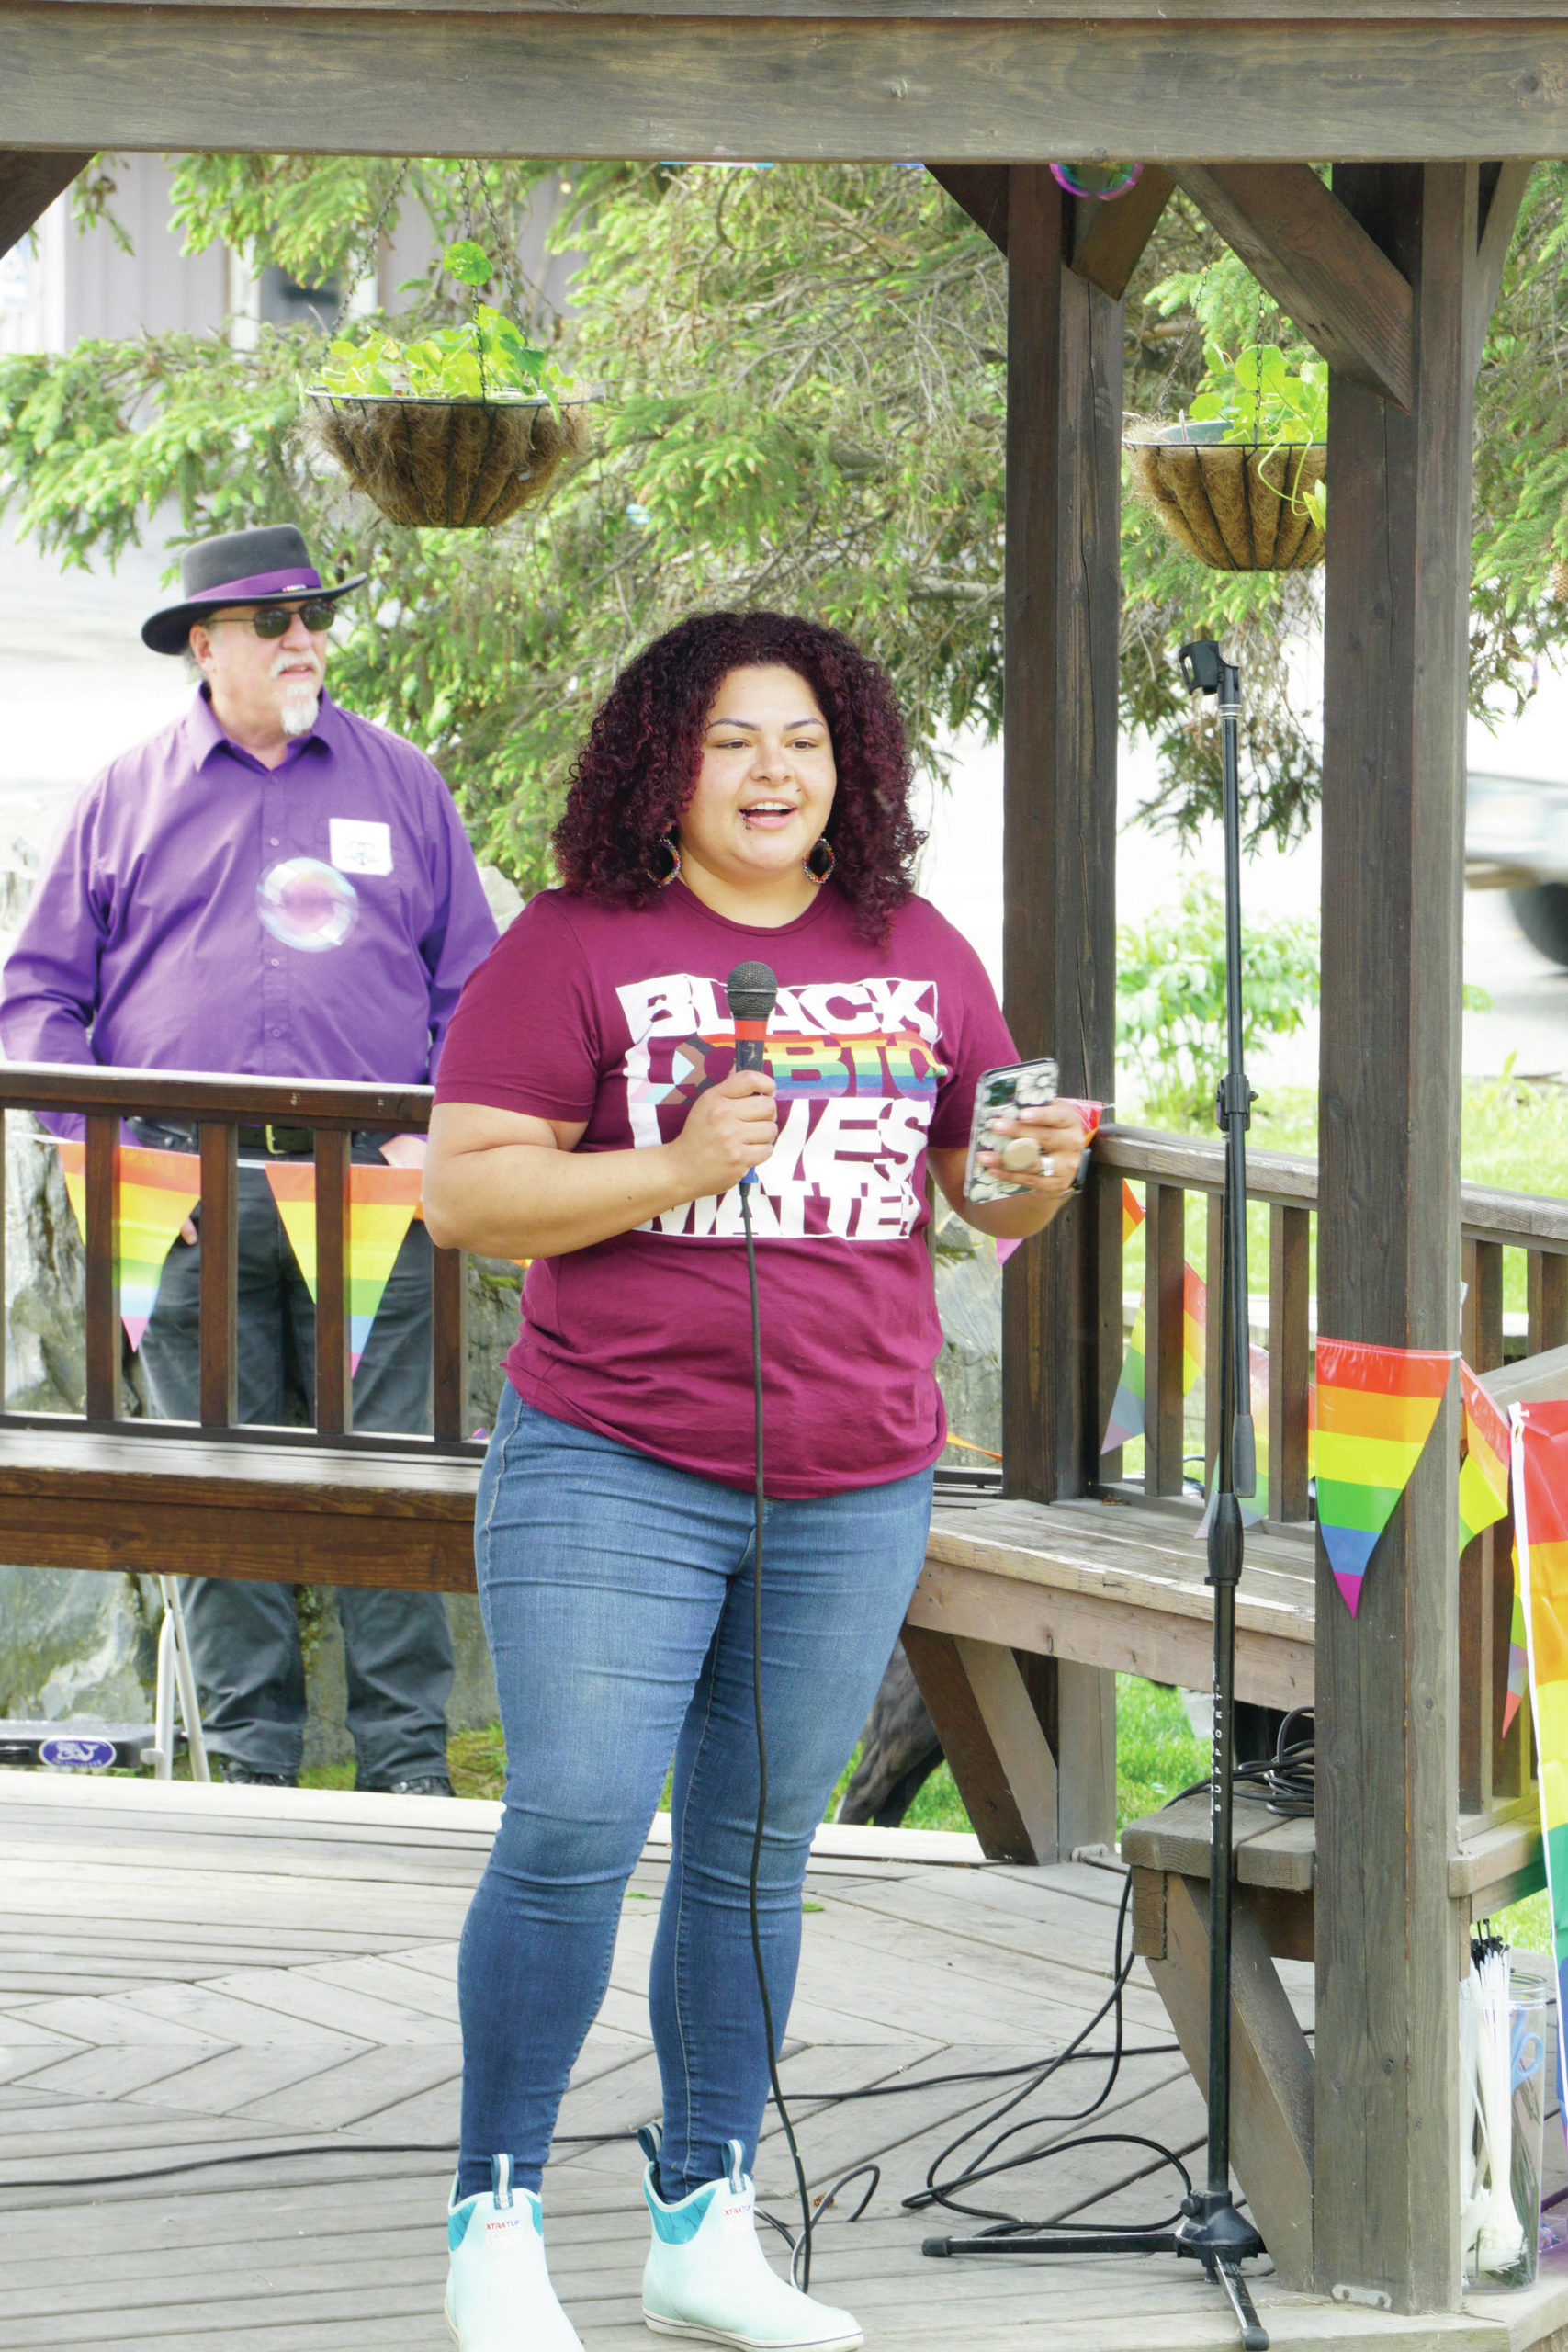 Xochitl Lopez-Ayala speaks on Saturday, June 19, 2021, at a combined Pride and Juneteenth event at Wisdom, Knowledge, Faith and Love Park in Homer, Alaska. (Photo by Michael Armstrong/Homer News)